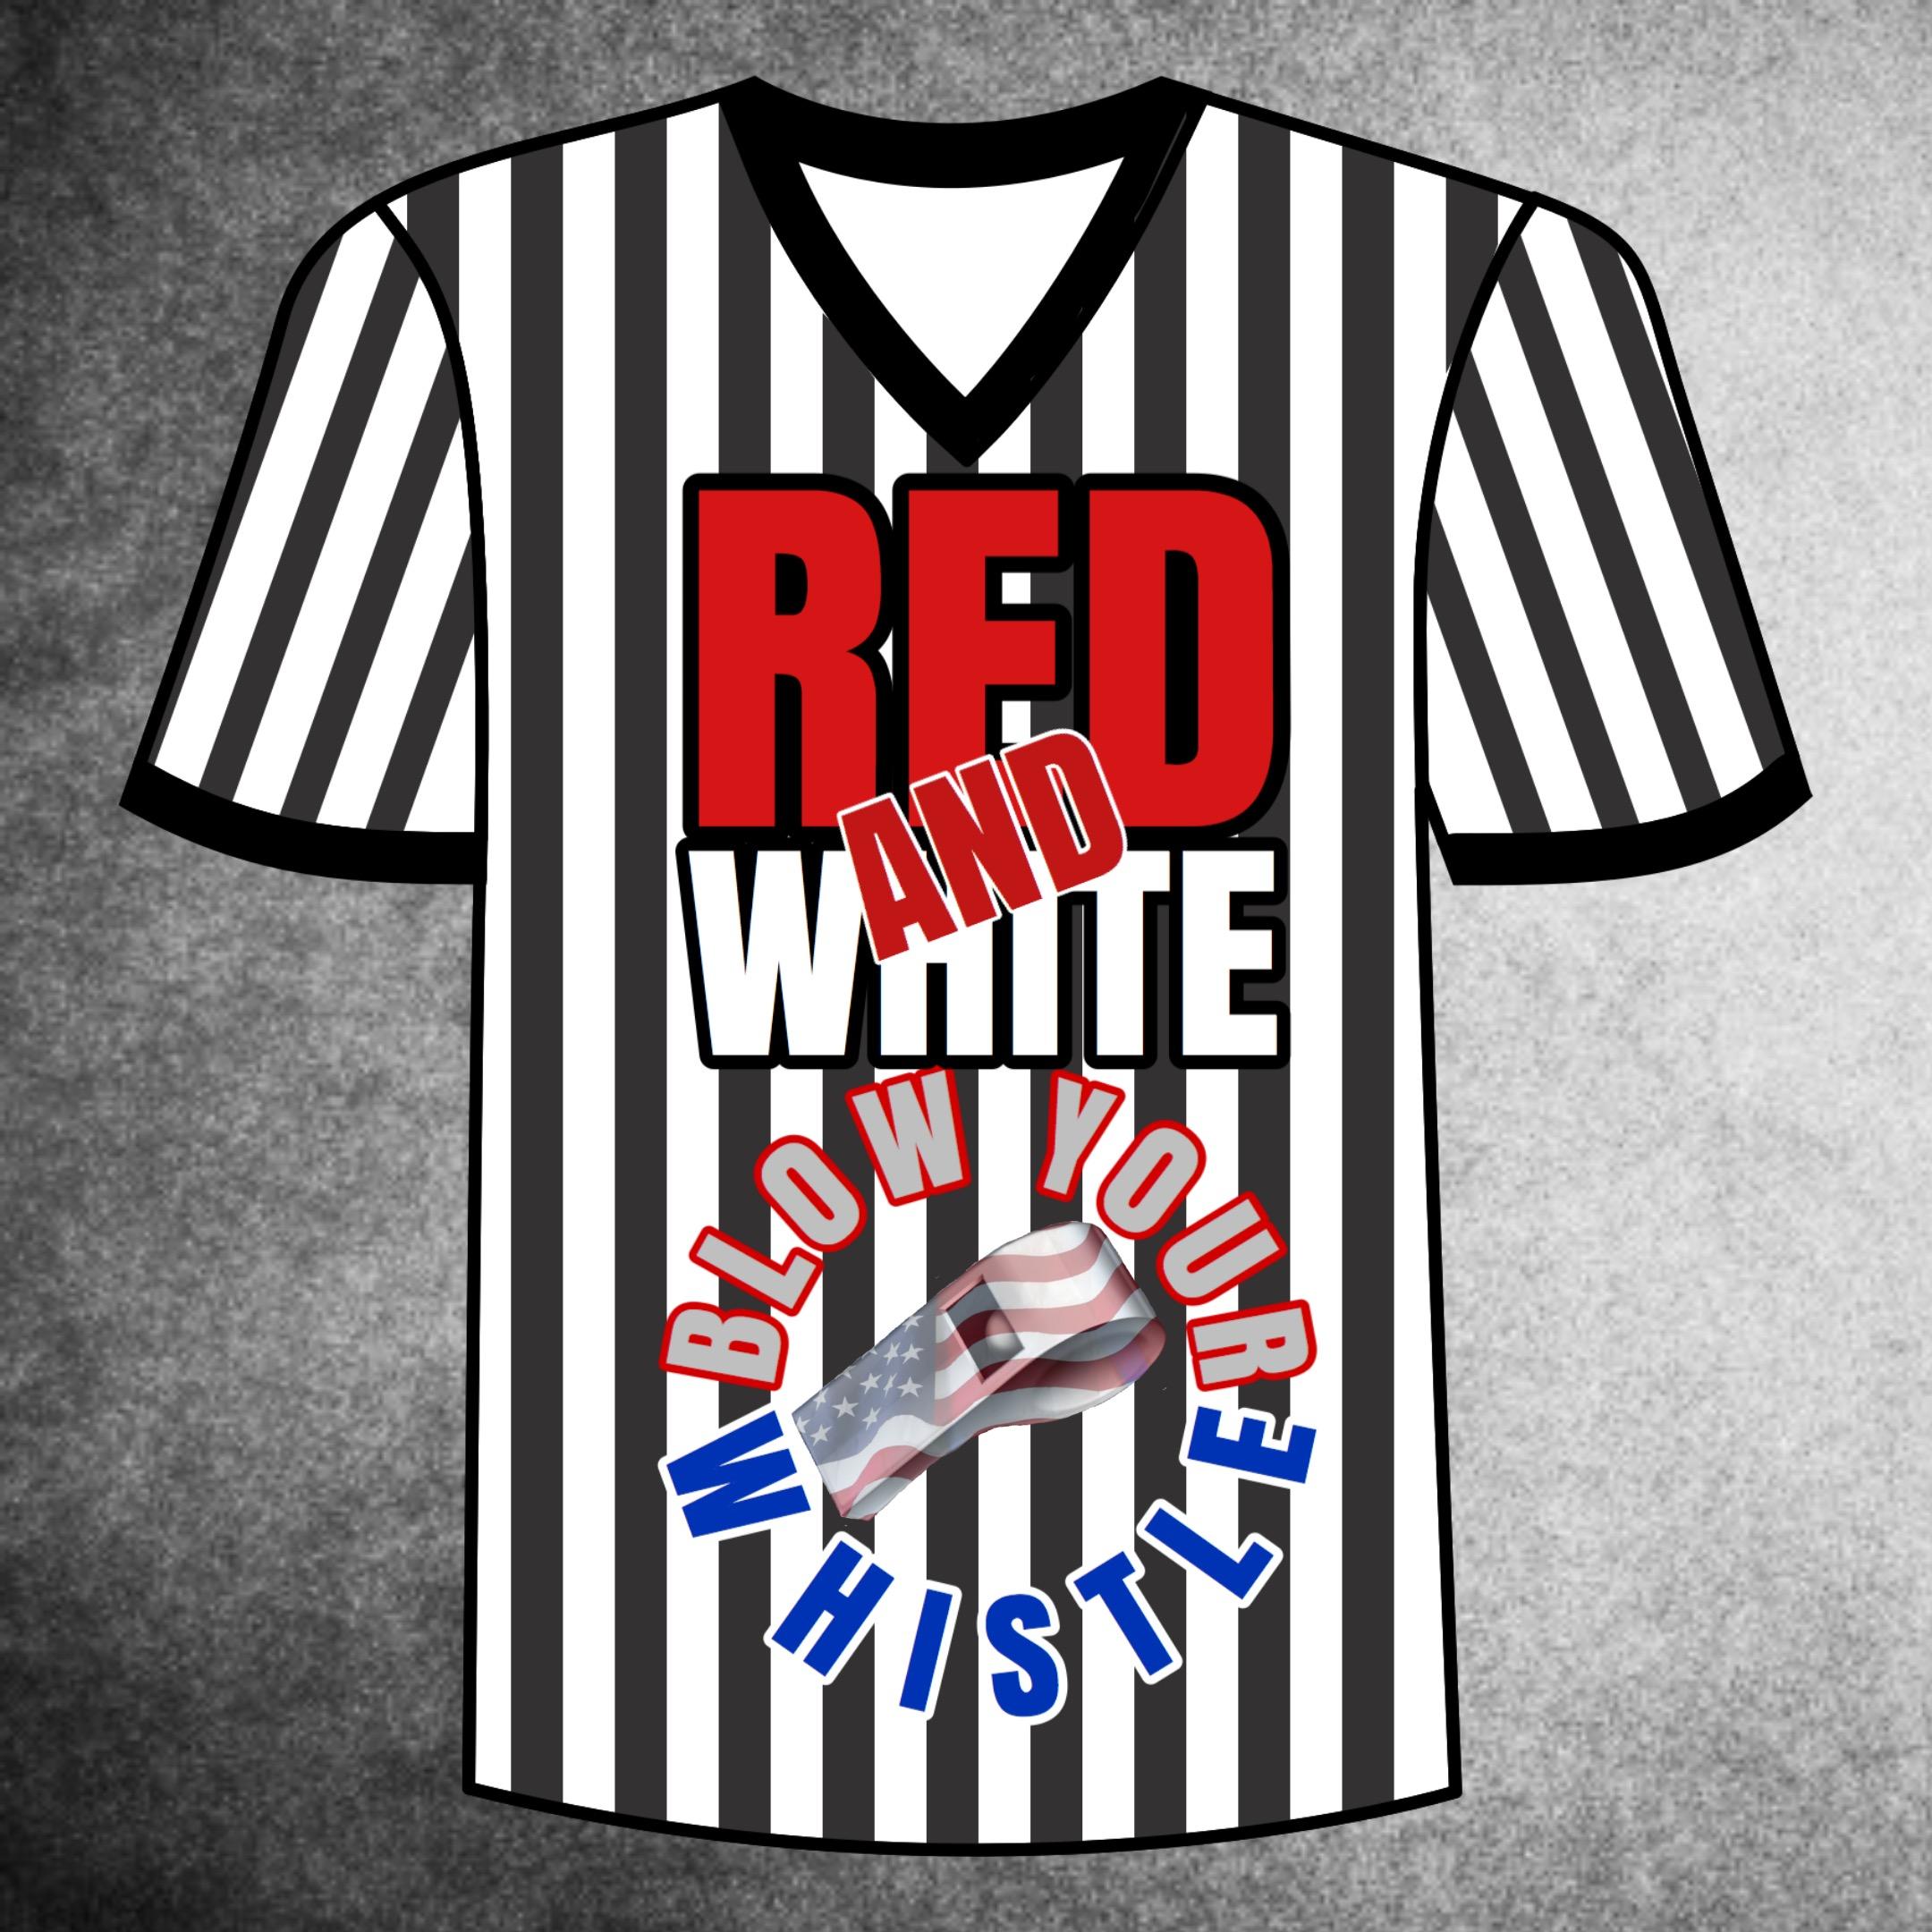 The Red White And Blow Your Whistle